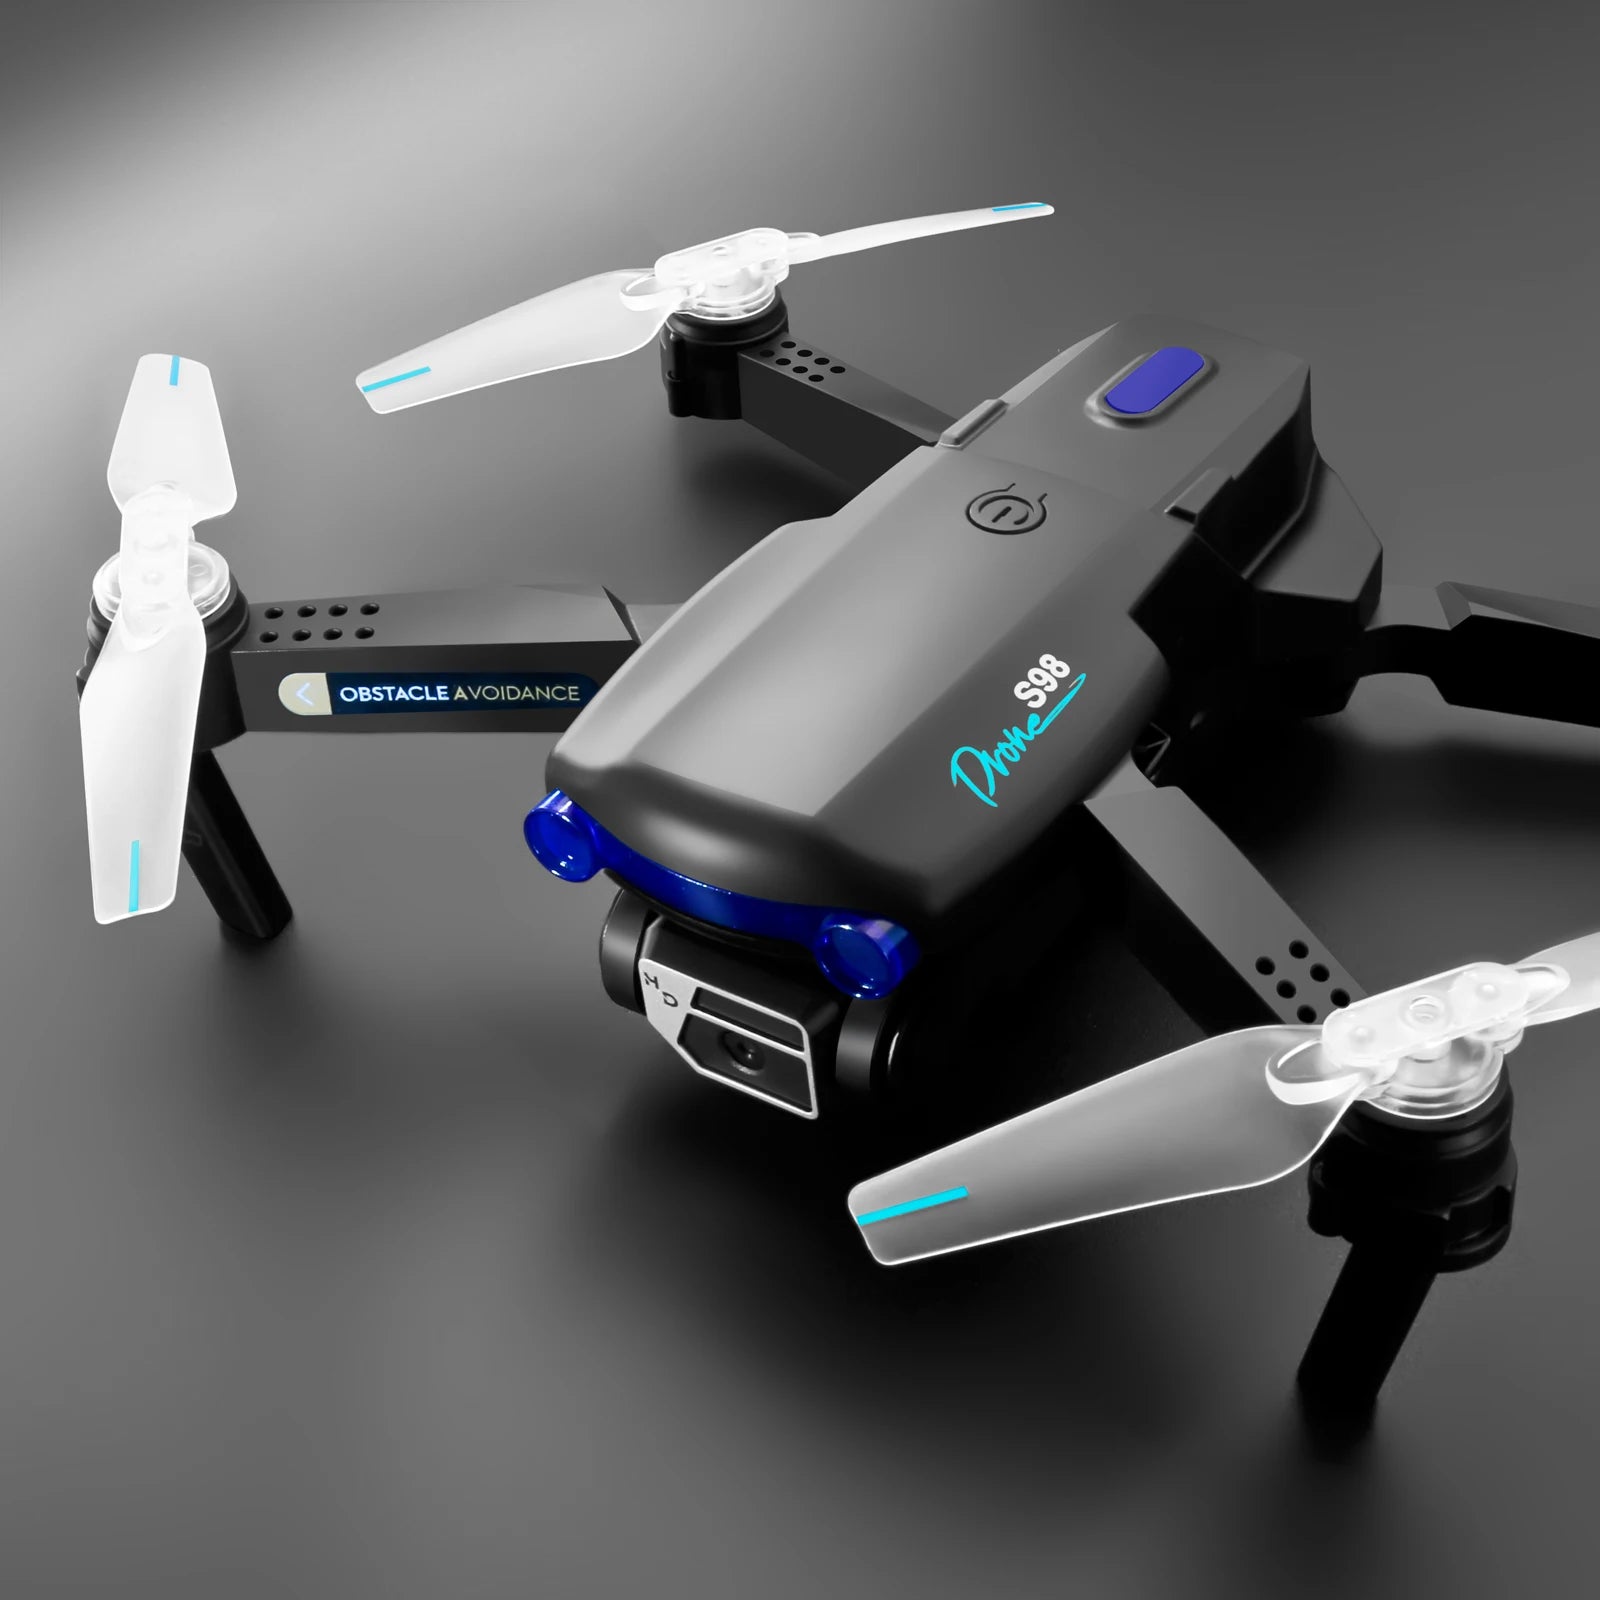 S98  Drone, kbdfa aerial photography s98 is a